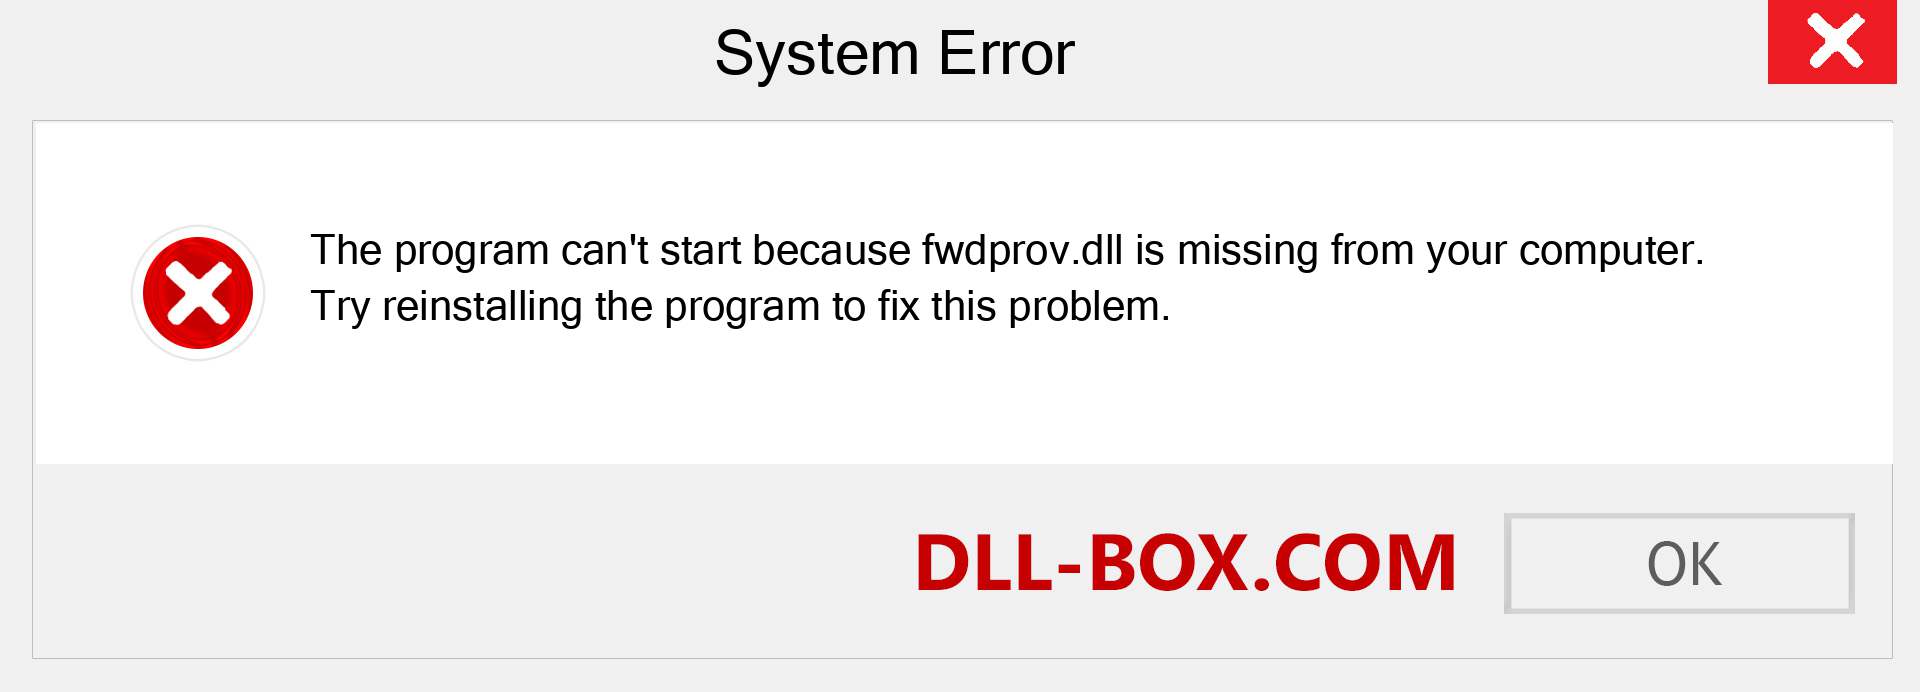  fwdprov.dll file is missing?. Download for Windows 7, 8, 10 - Fix  fwdprov dll Missing Error on Windows, photos, images